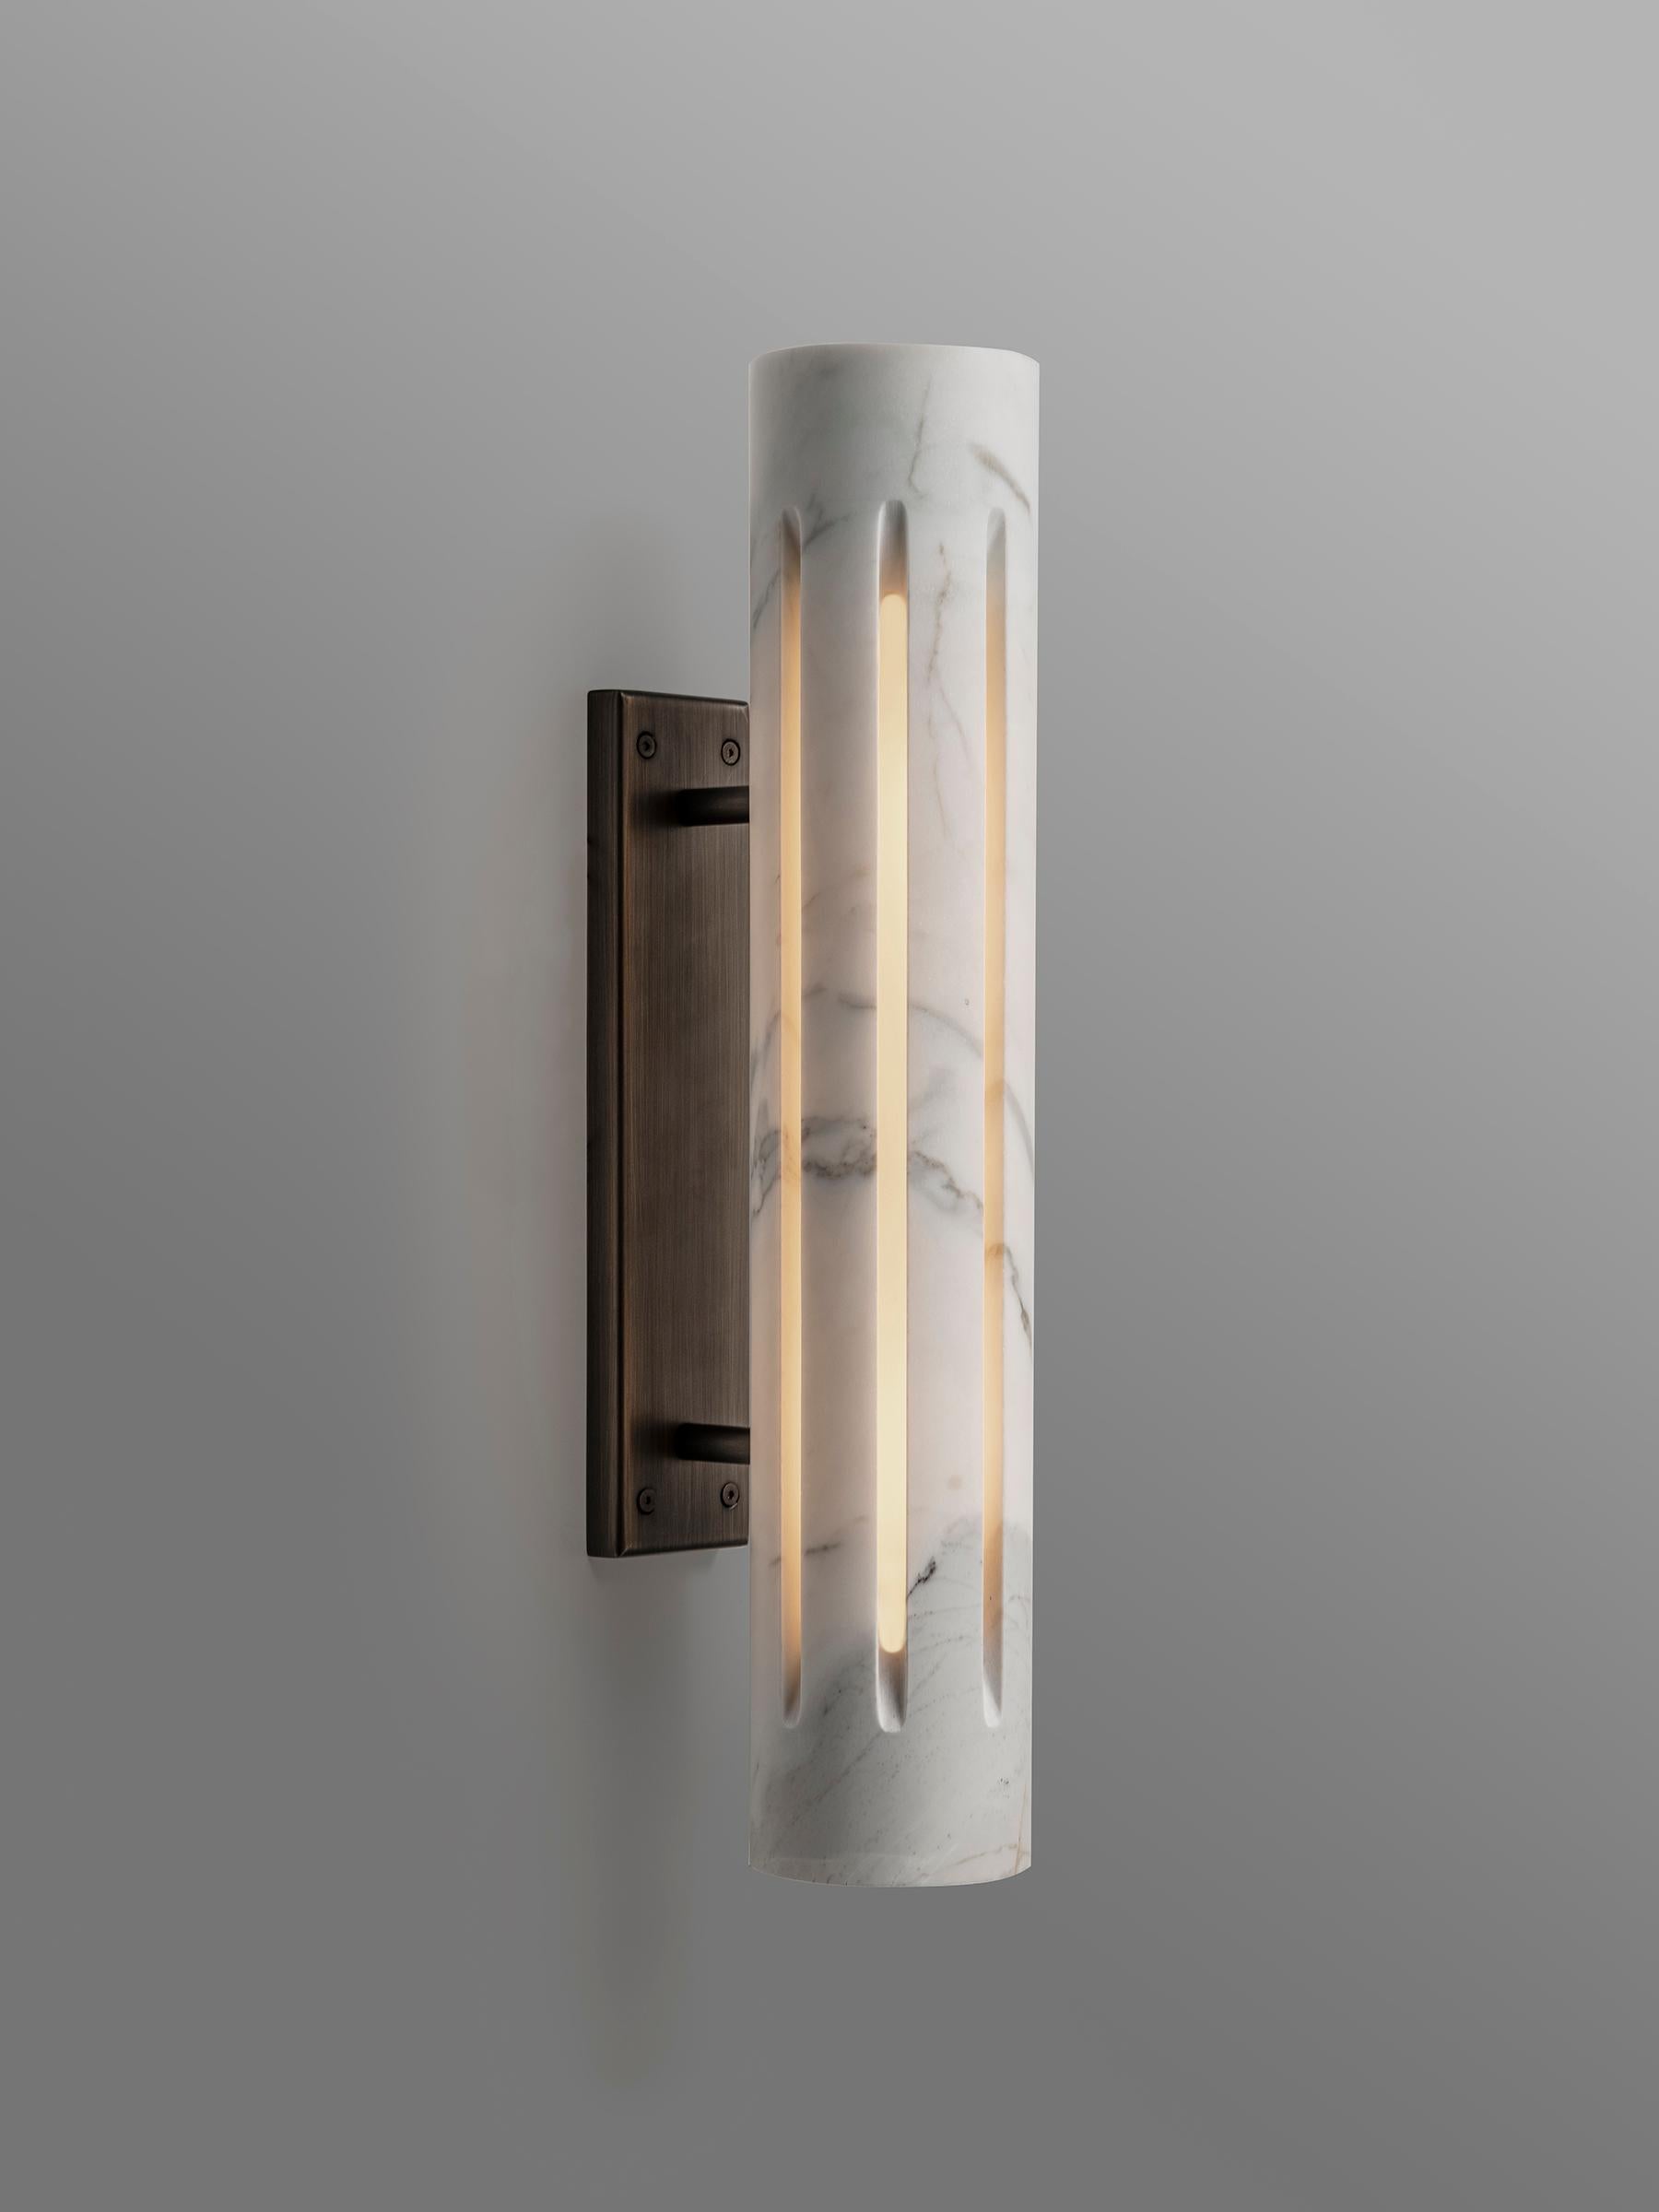 Aura Marble Lantern Sconce by Etamorph
Dimensions: Ø 50 x D 10 cm.
Materials: Calacata Marble and Black Matter stone.

All our lamps can be wired according to each country. If sold to the USA it will be wired for the USA for instance. Please contact